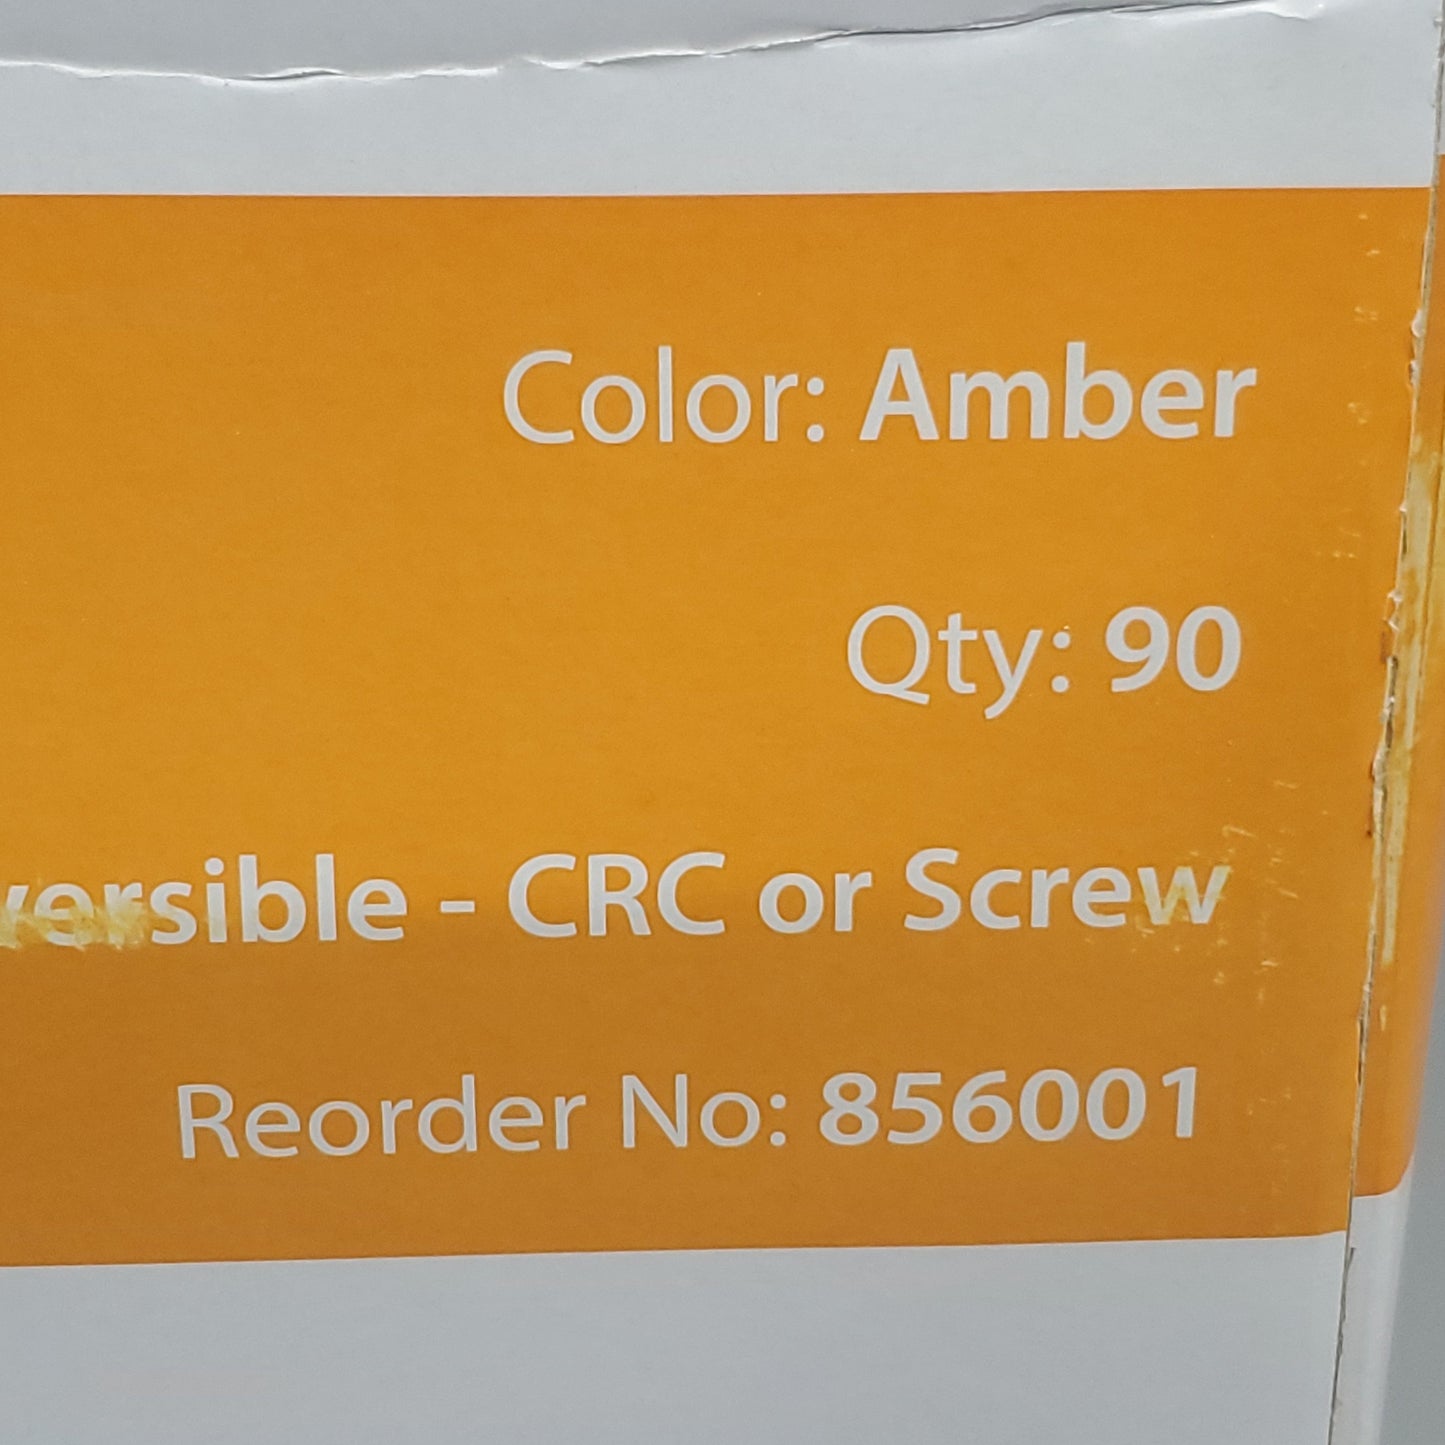 COLORSAFE Vials (90 PACK) 60 dram Amber Vial & Reversible Caps 856001 (New Other)